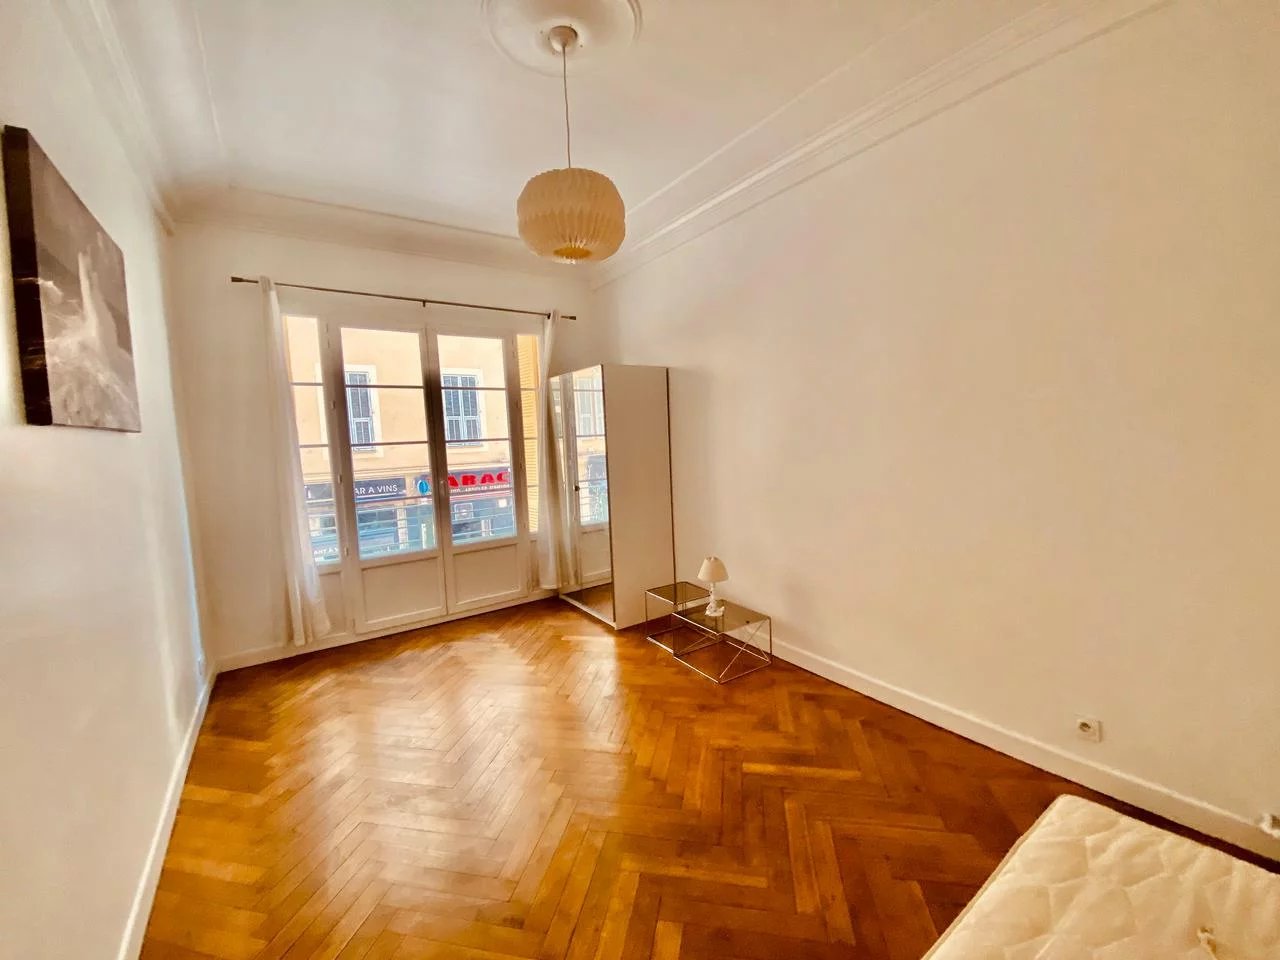 Appartement  2 Rooms 53m2  for sale   329 000 €